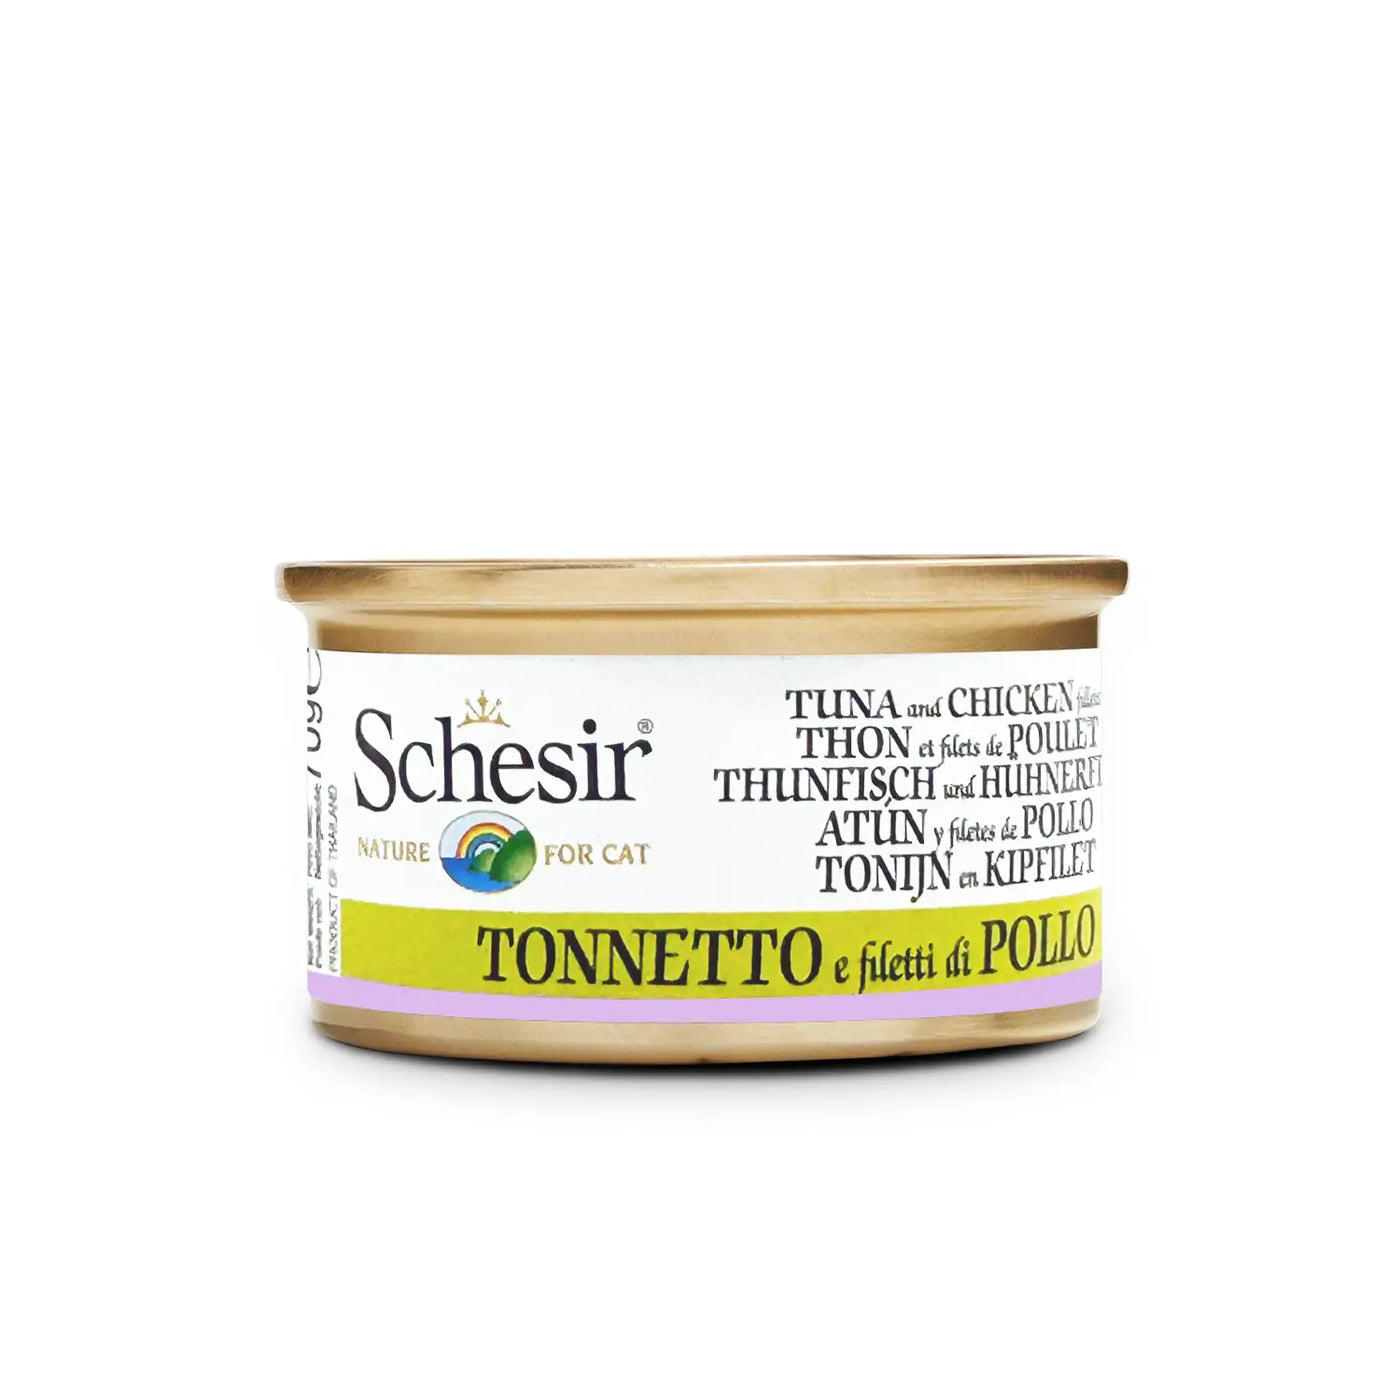 Schesir - Complementary Wet Food For Adult Cats - Tuna With Chicken In Cooking Broth 70g